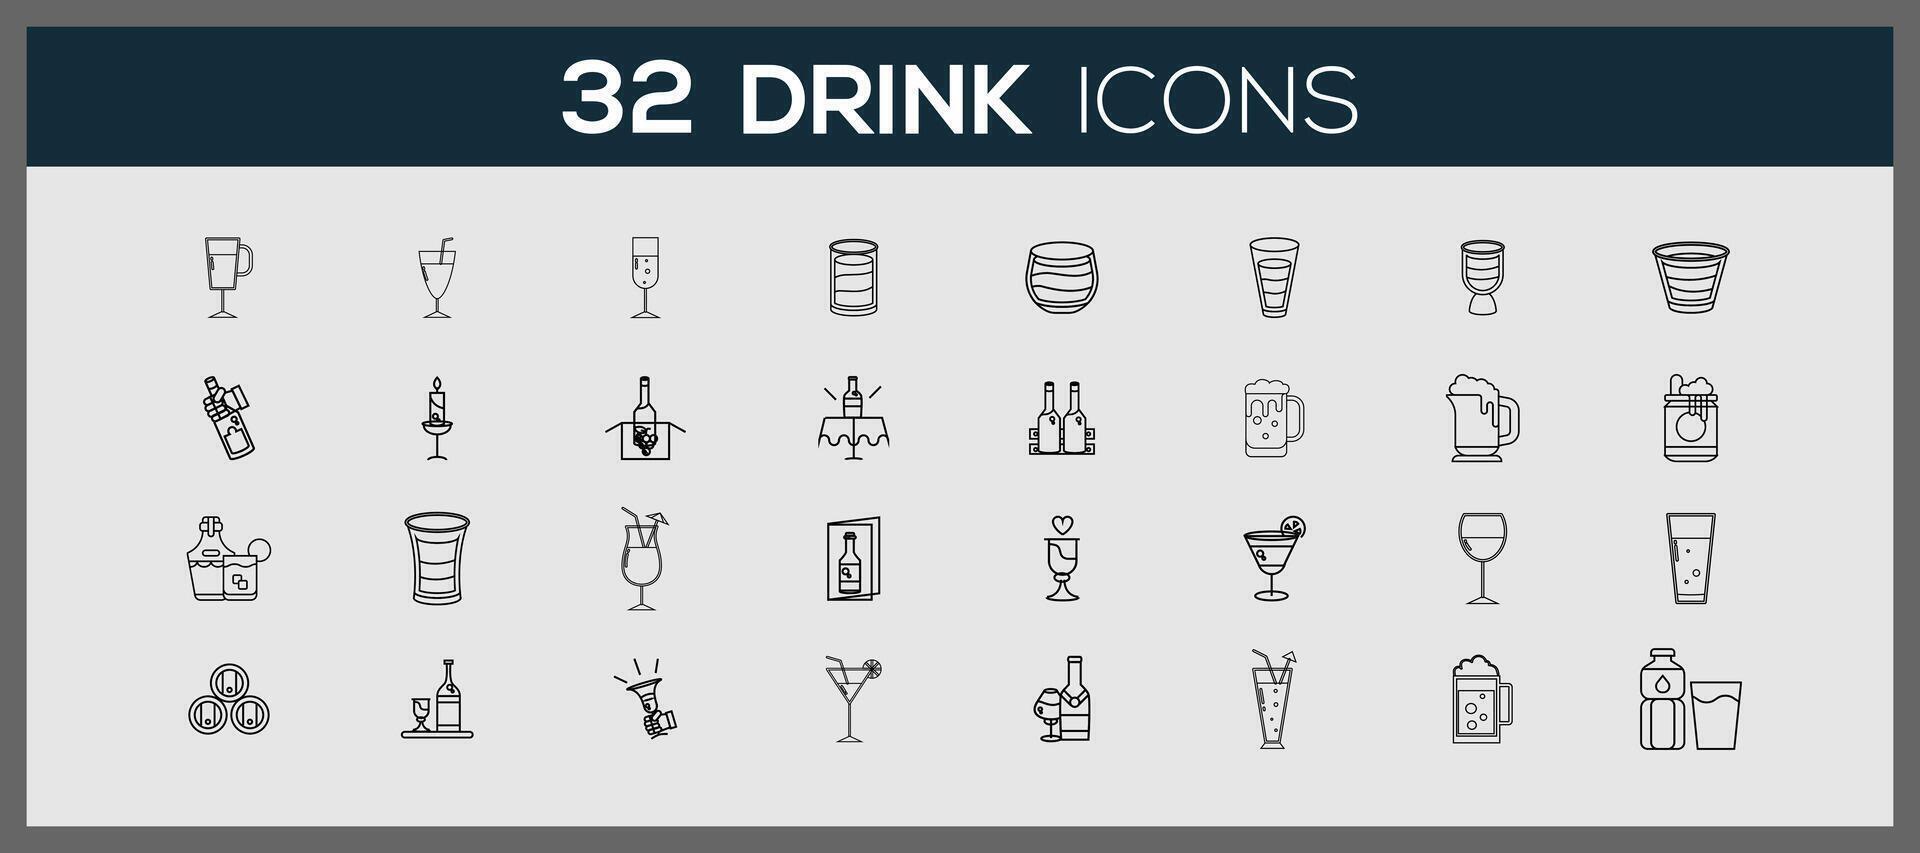 Doodle drinks icons. Refreshing drinks icons collection illustration. Round icons with the different refreshing drinks. vector